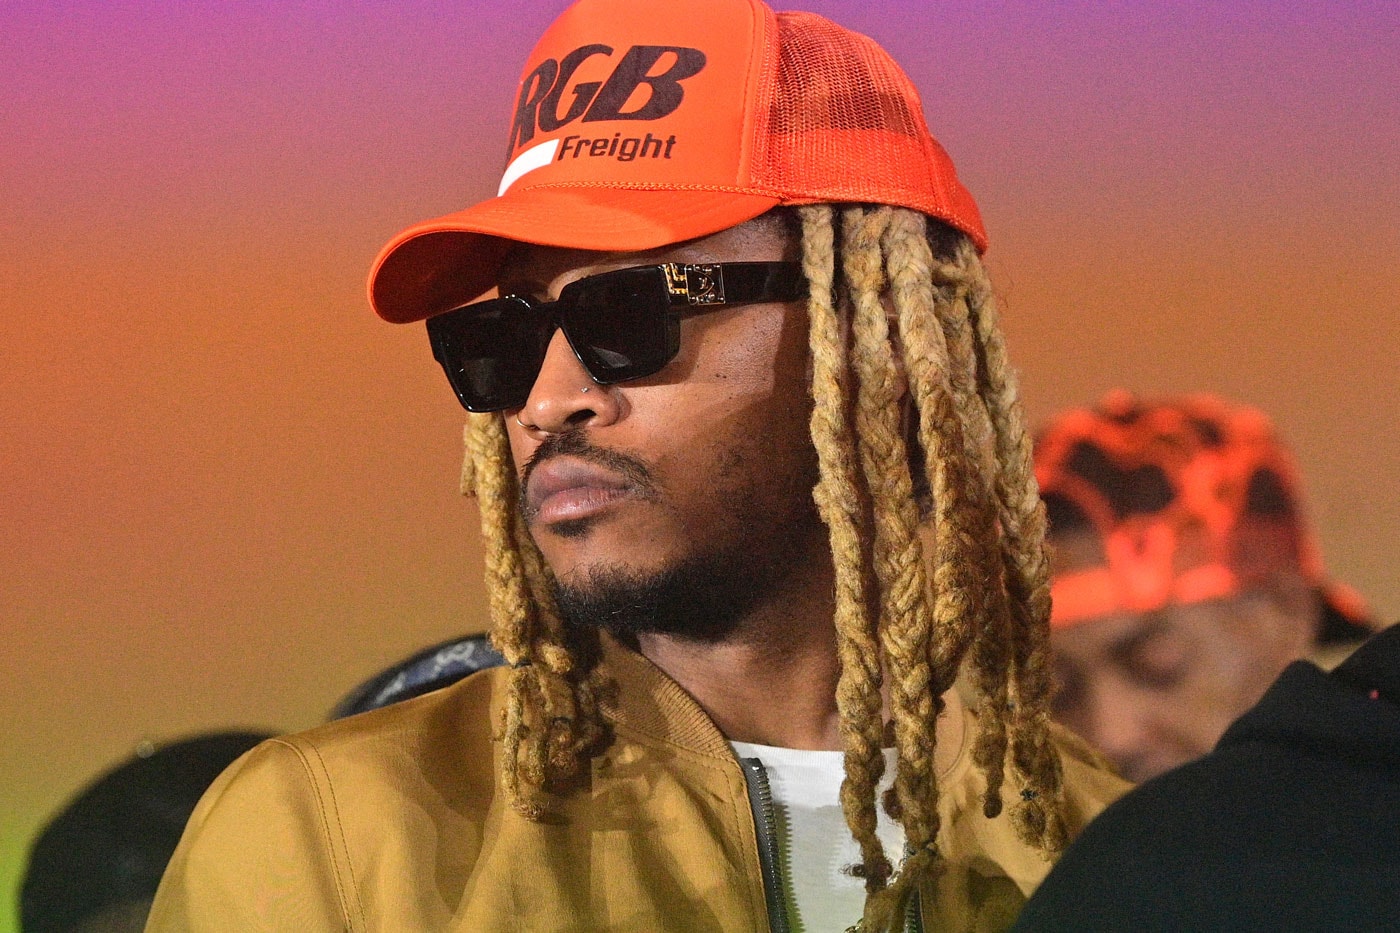 Future Remembers His Successful Year of 2015 With "Moments" Music Video